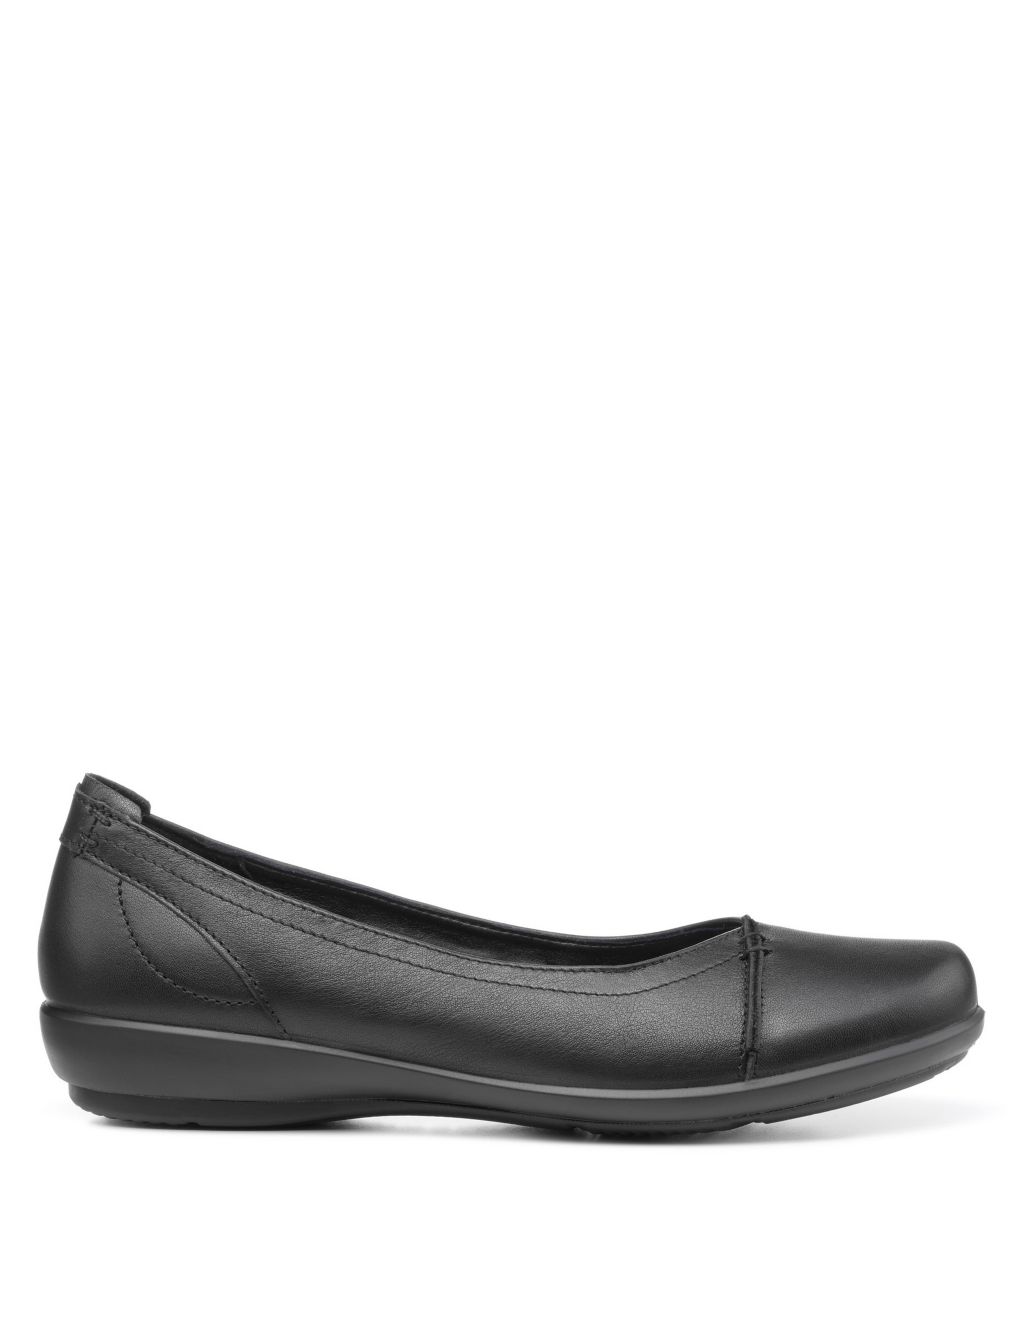 Robyn II Wide Fit Leather Ballet Pumps image 1